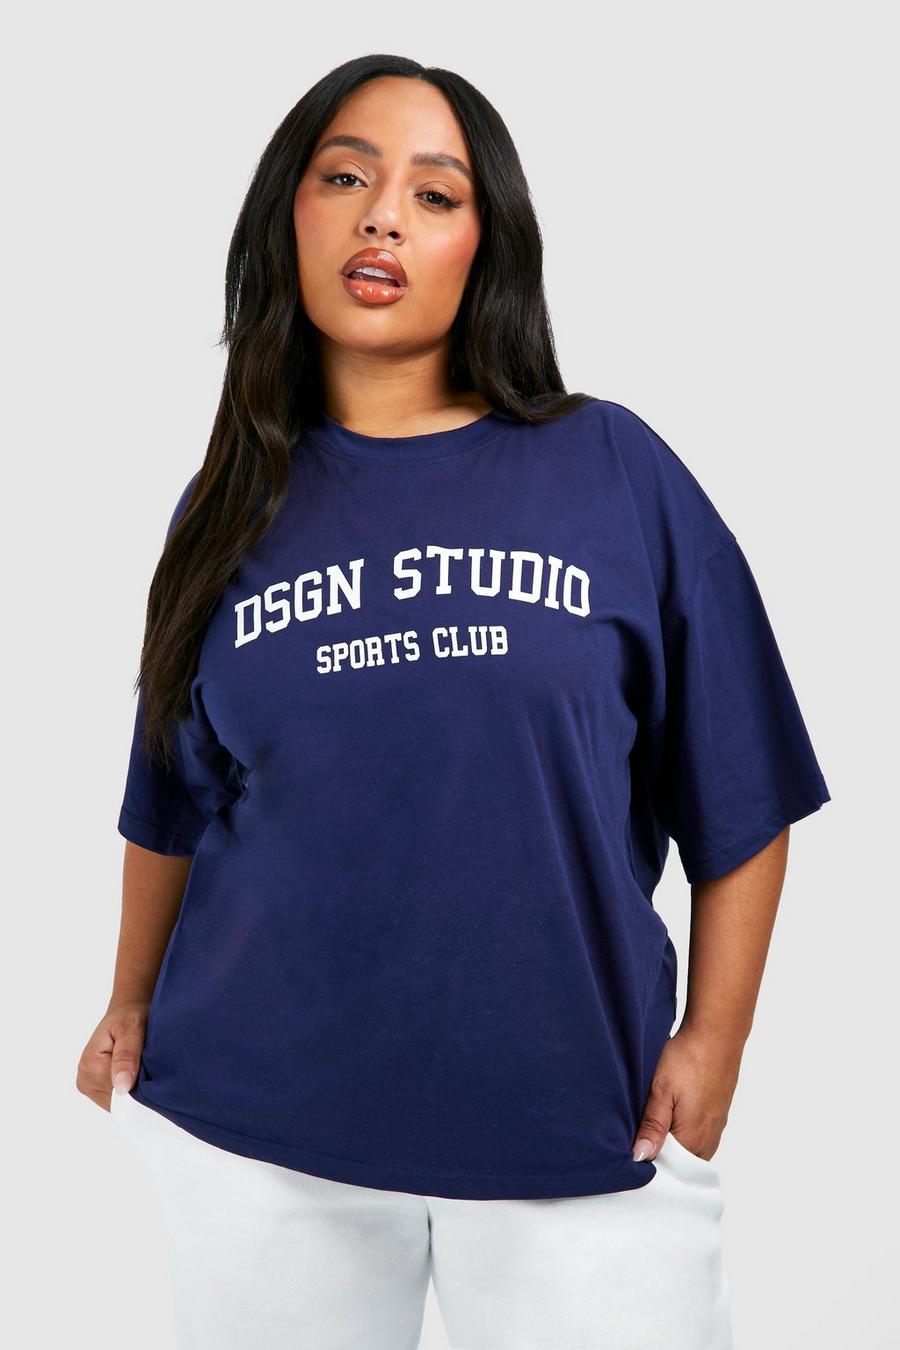 Navy Plus Oversized Dsgn Studio Sports Club T-Shirt image number 1